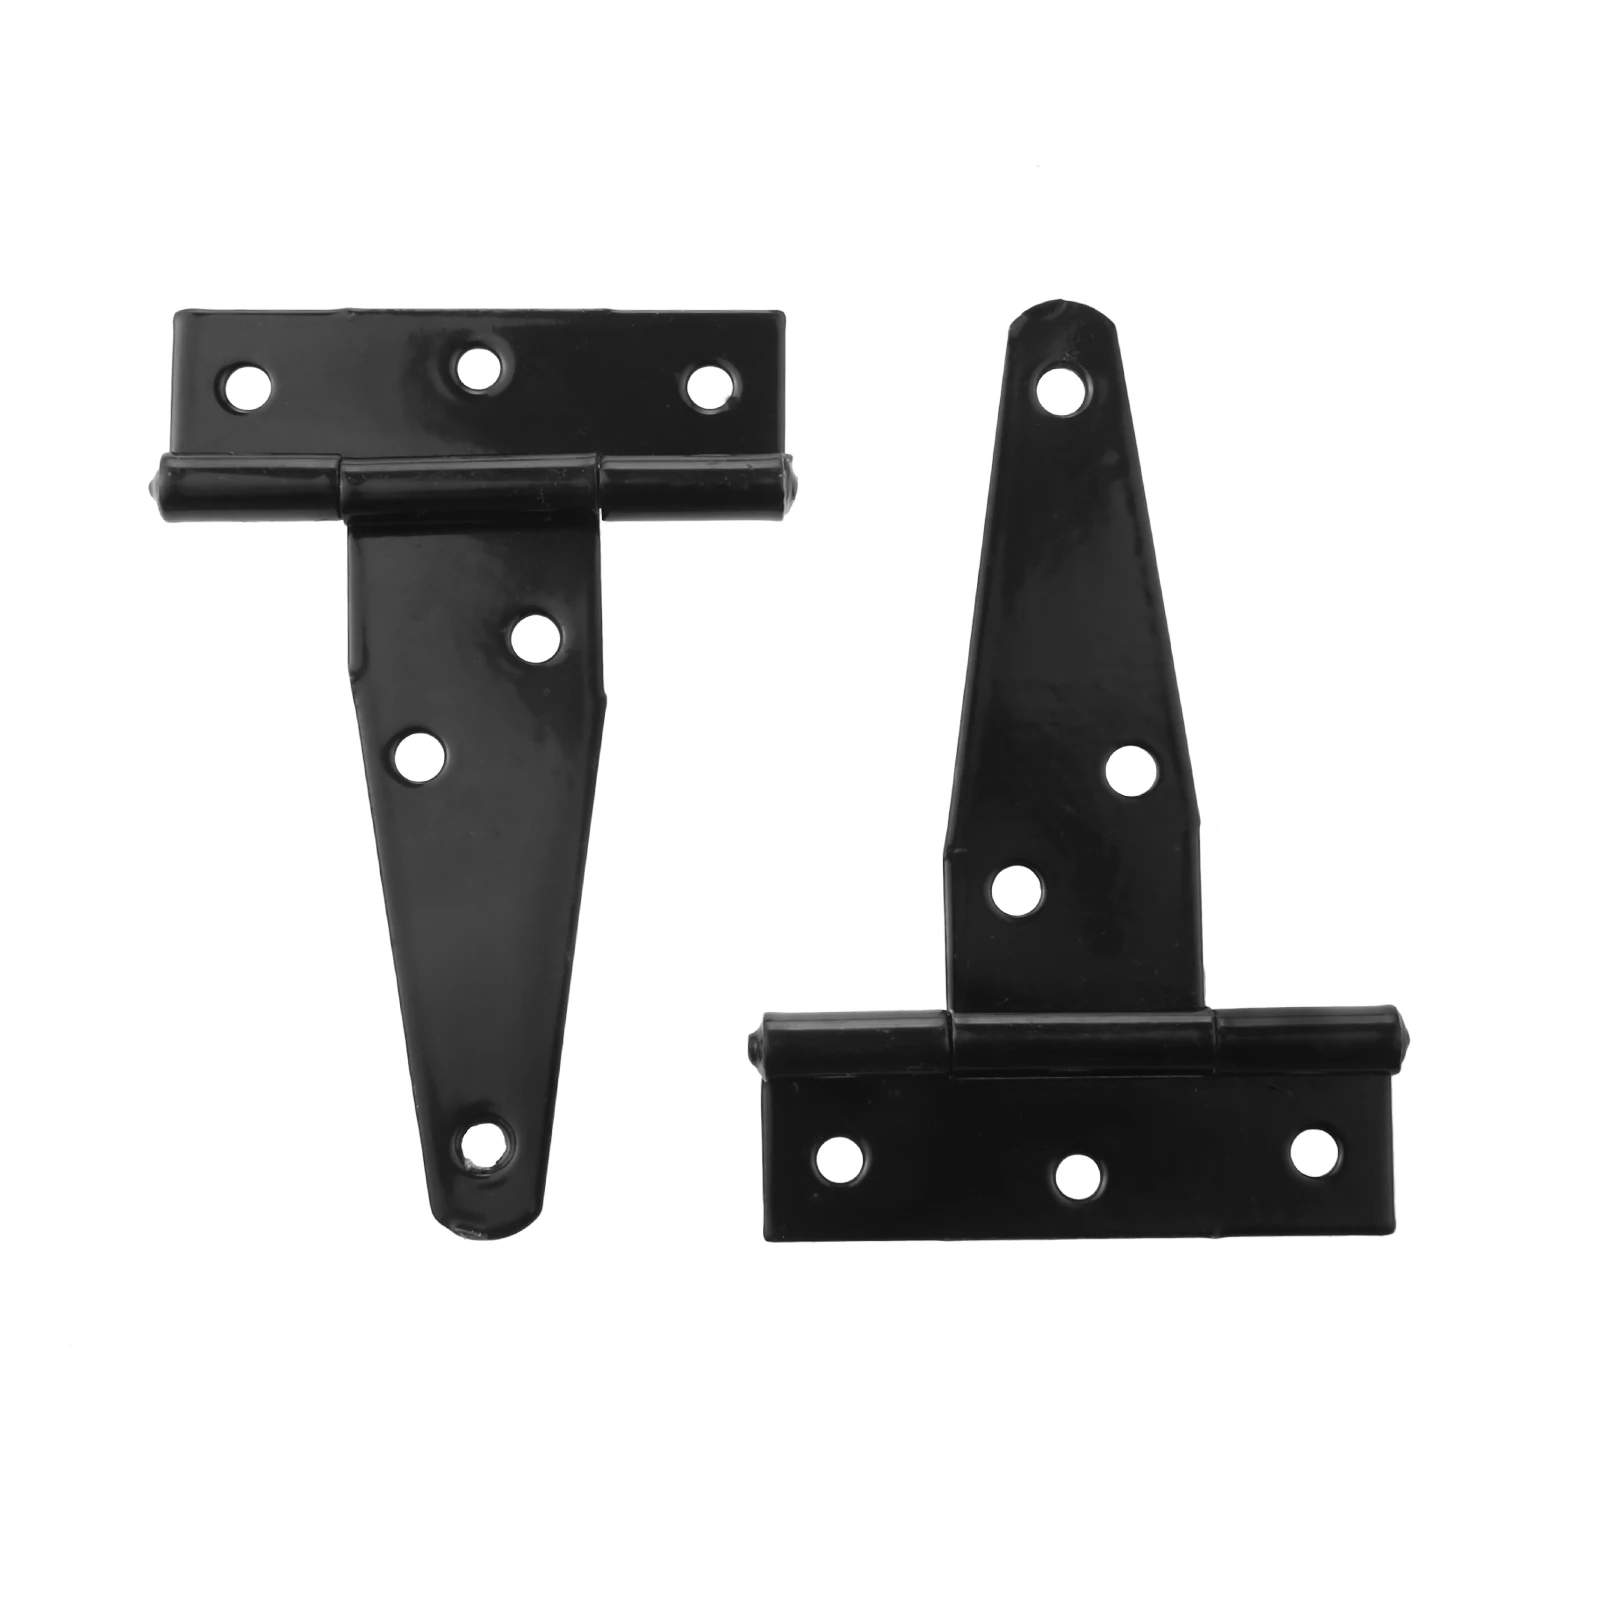 2Pcs T Shape Heavy Duty Gate Hinge with Screws 2/3/4/5/6/8/10/12 Inch T-Strap Shed Hinge Furniture Wooden Door Barn Gates Hinges